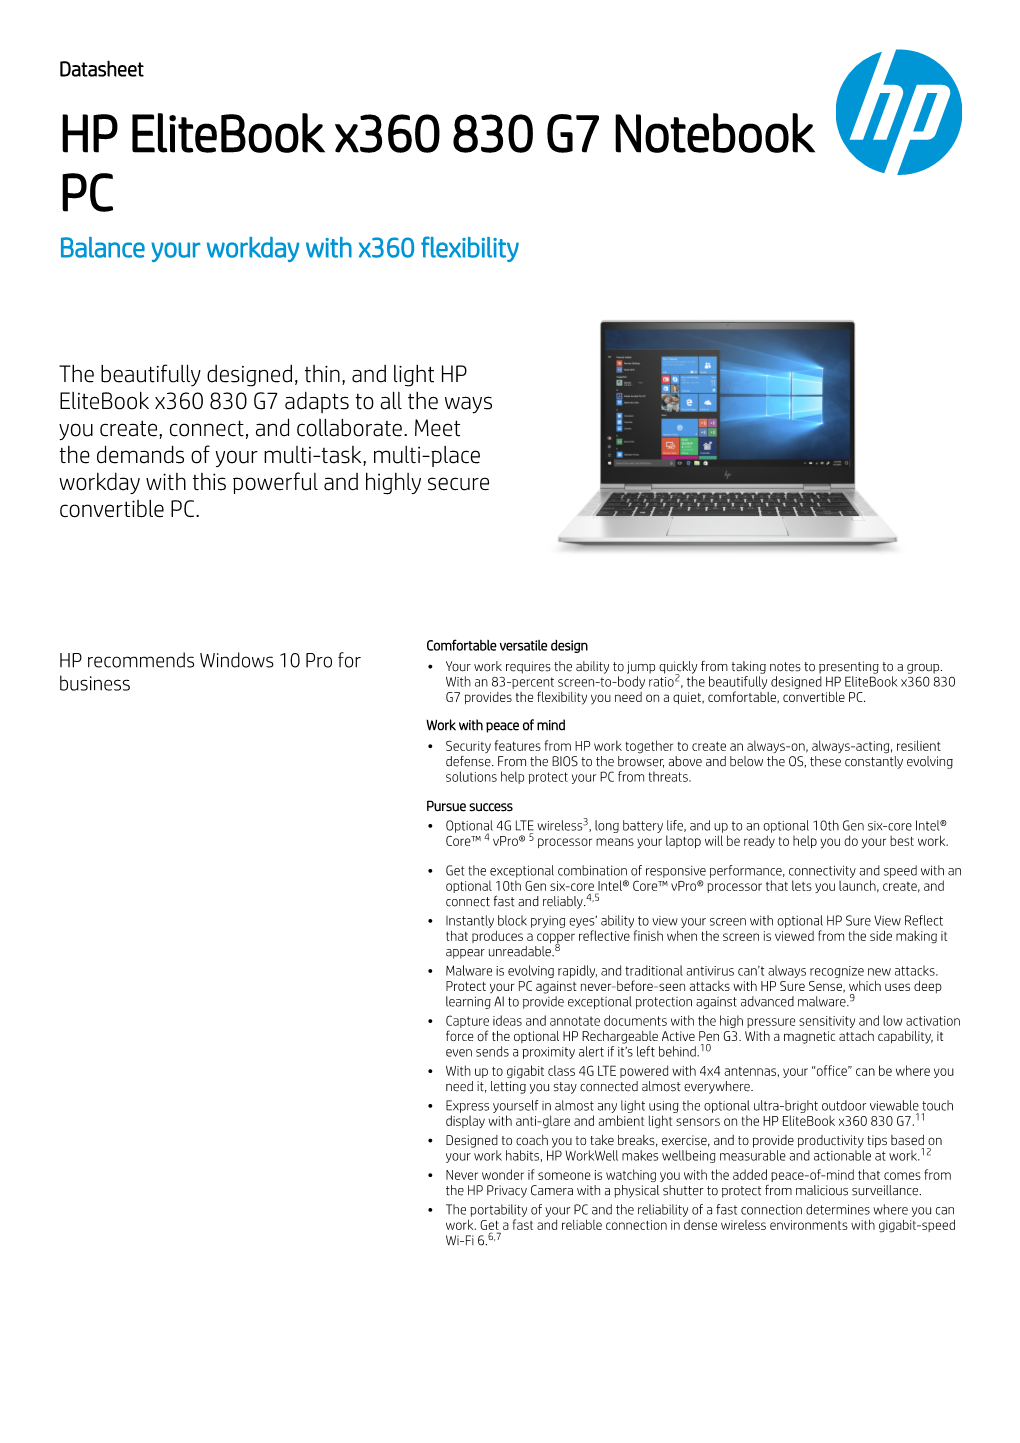 HP Elitebook X360 830 G7 Notebook PC Balance Your Workday with X360 Flexibility